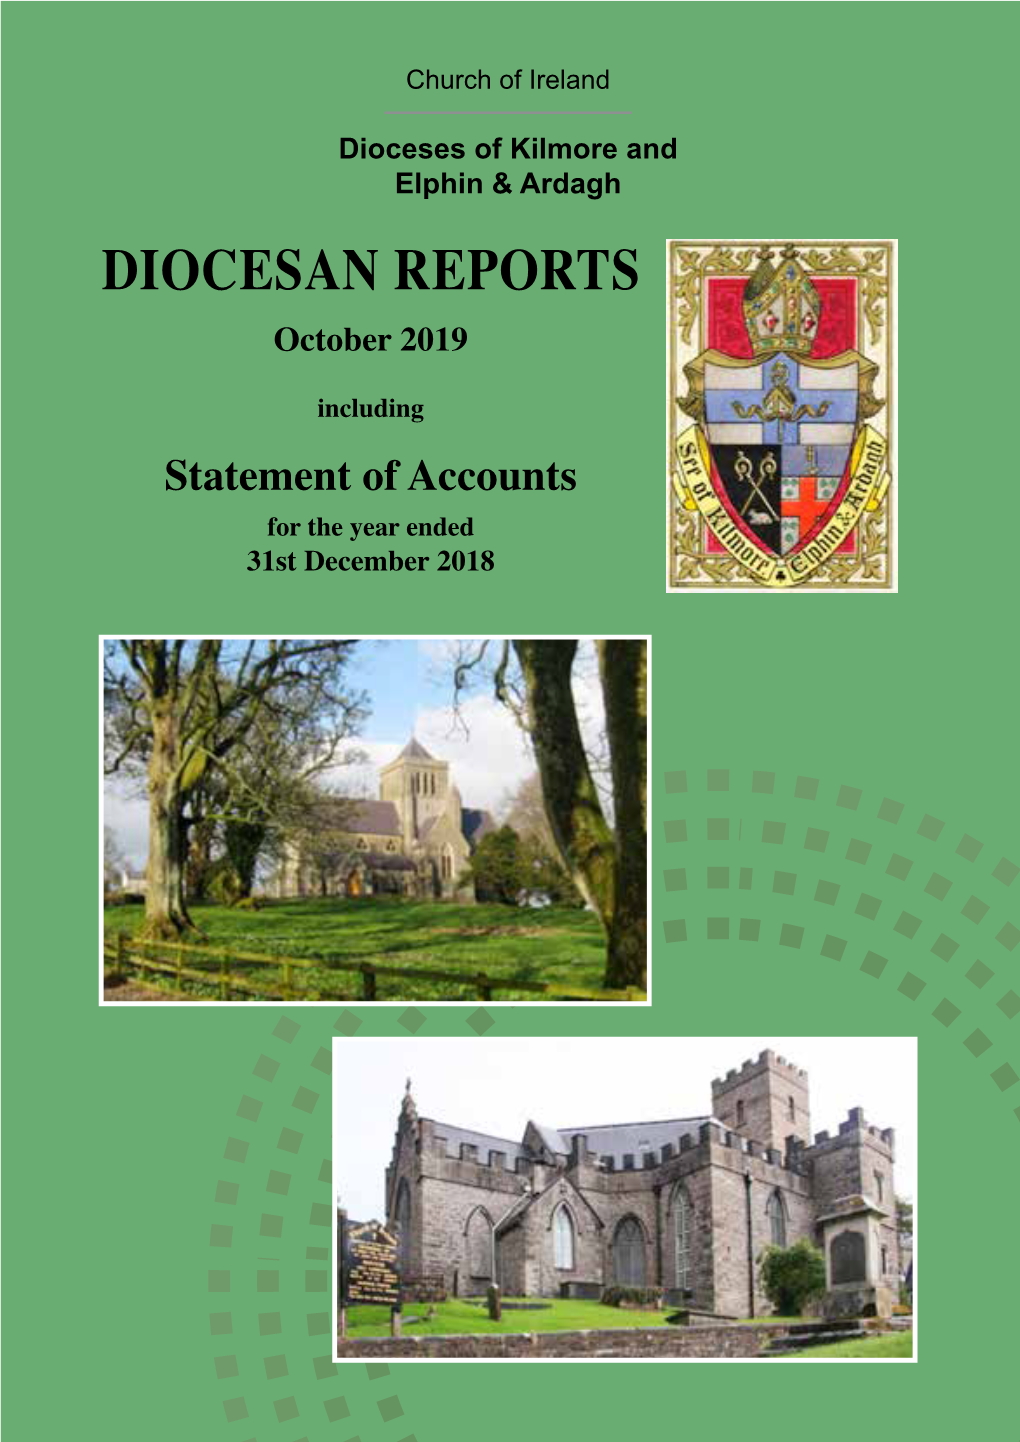 DIOCESAN REPORTS October 2019